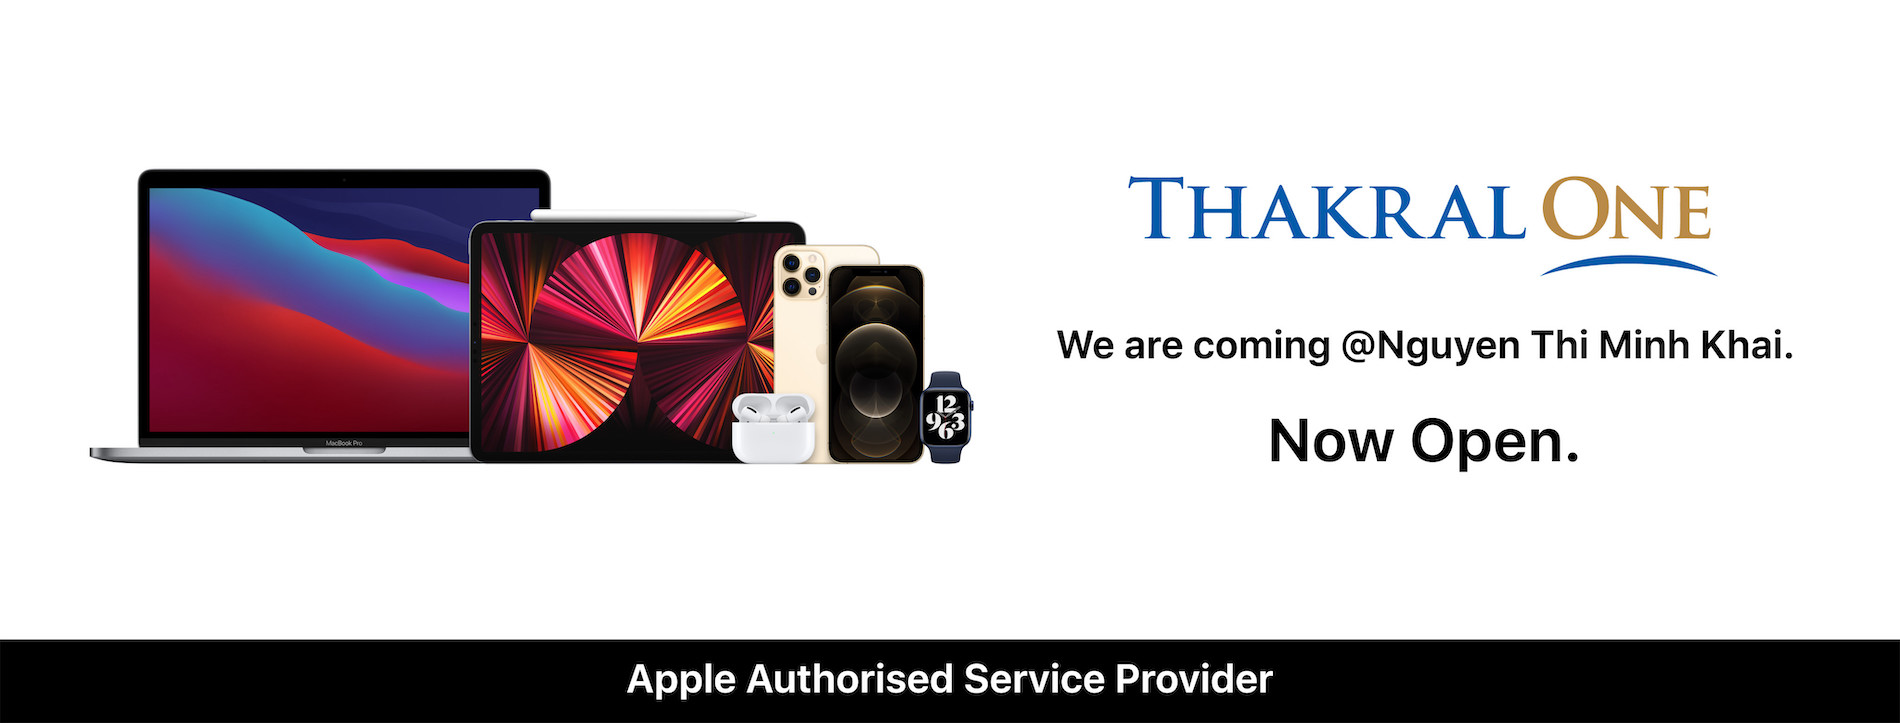 Thakral One Apple Authorized Service Provider